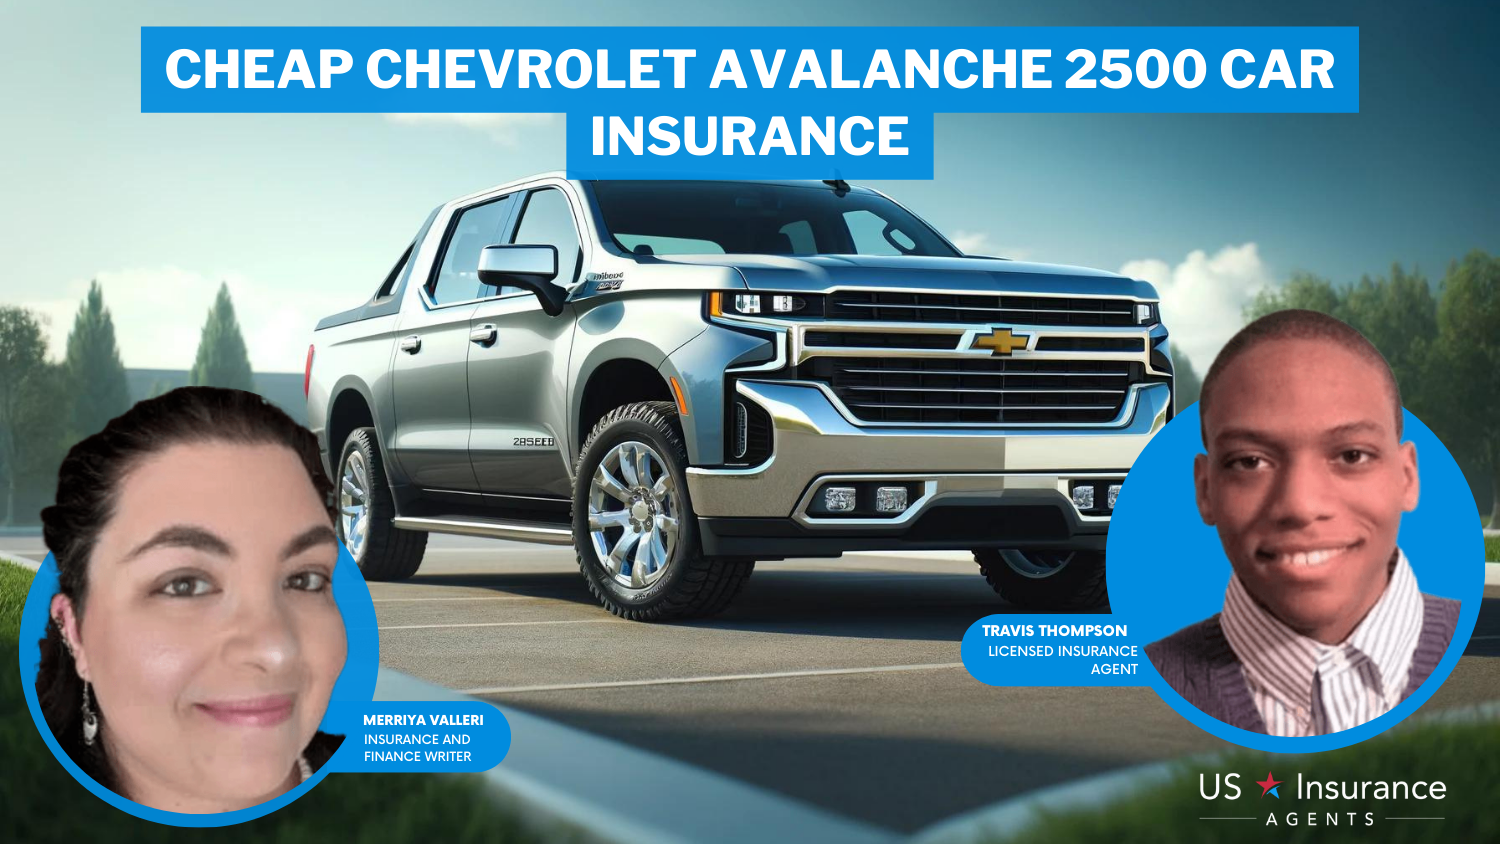 Cheap Chevrolet Avalanche 2500 Car Insurance: AAA, USAA, and Erie.